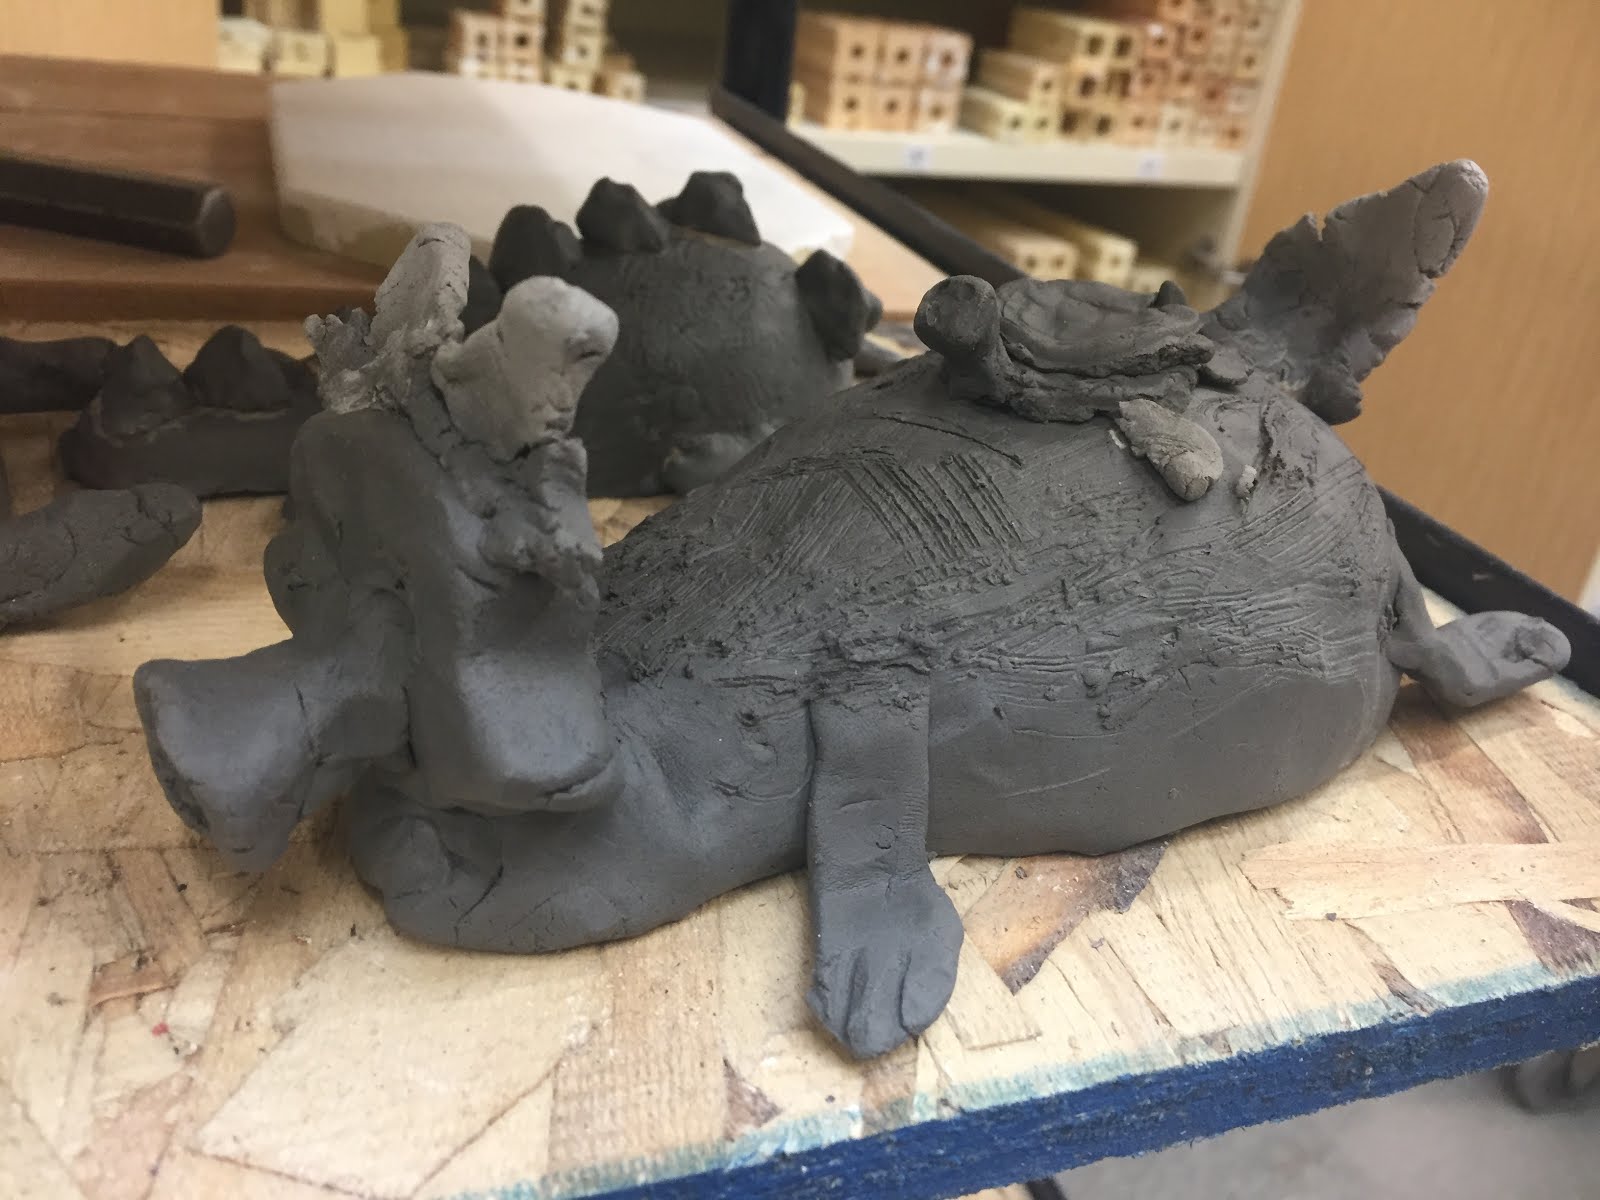 Sculpting with Clay: Wildlife | Grades 3-5